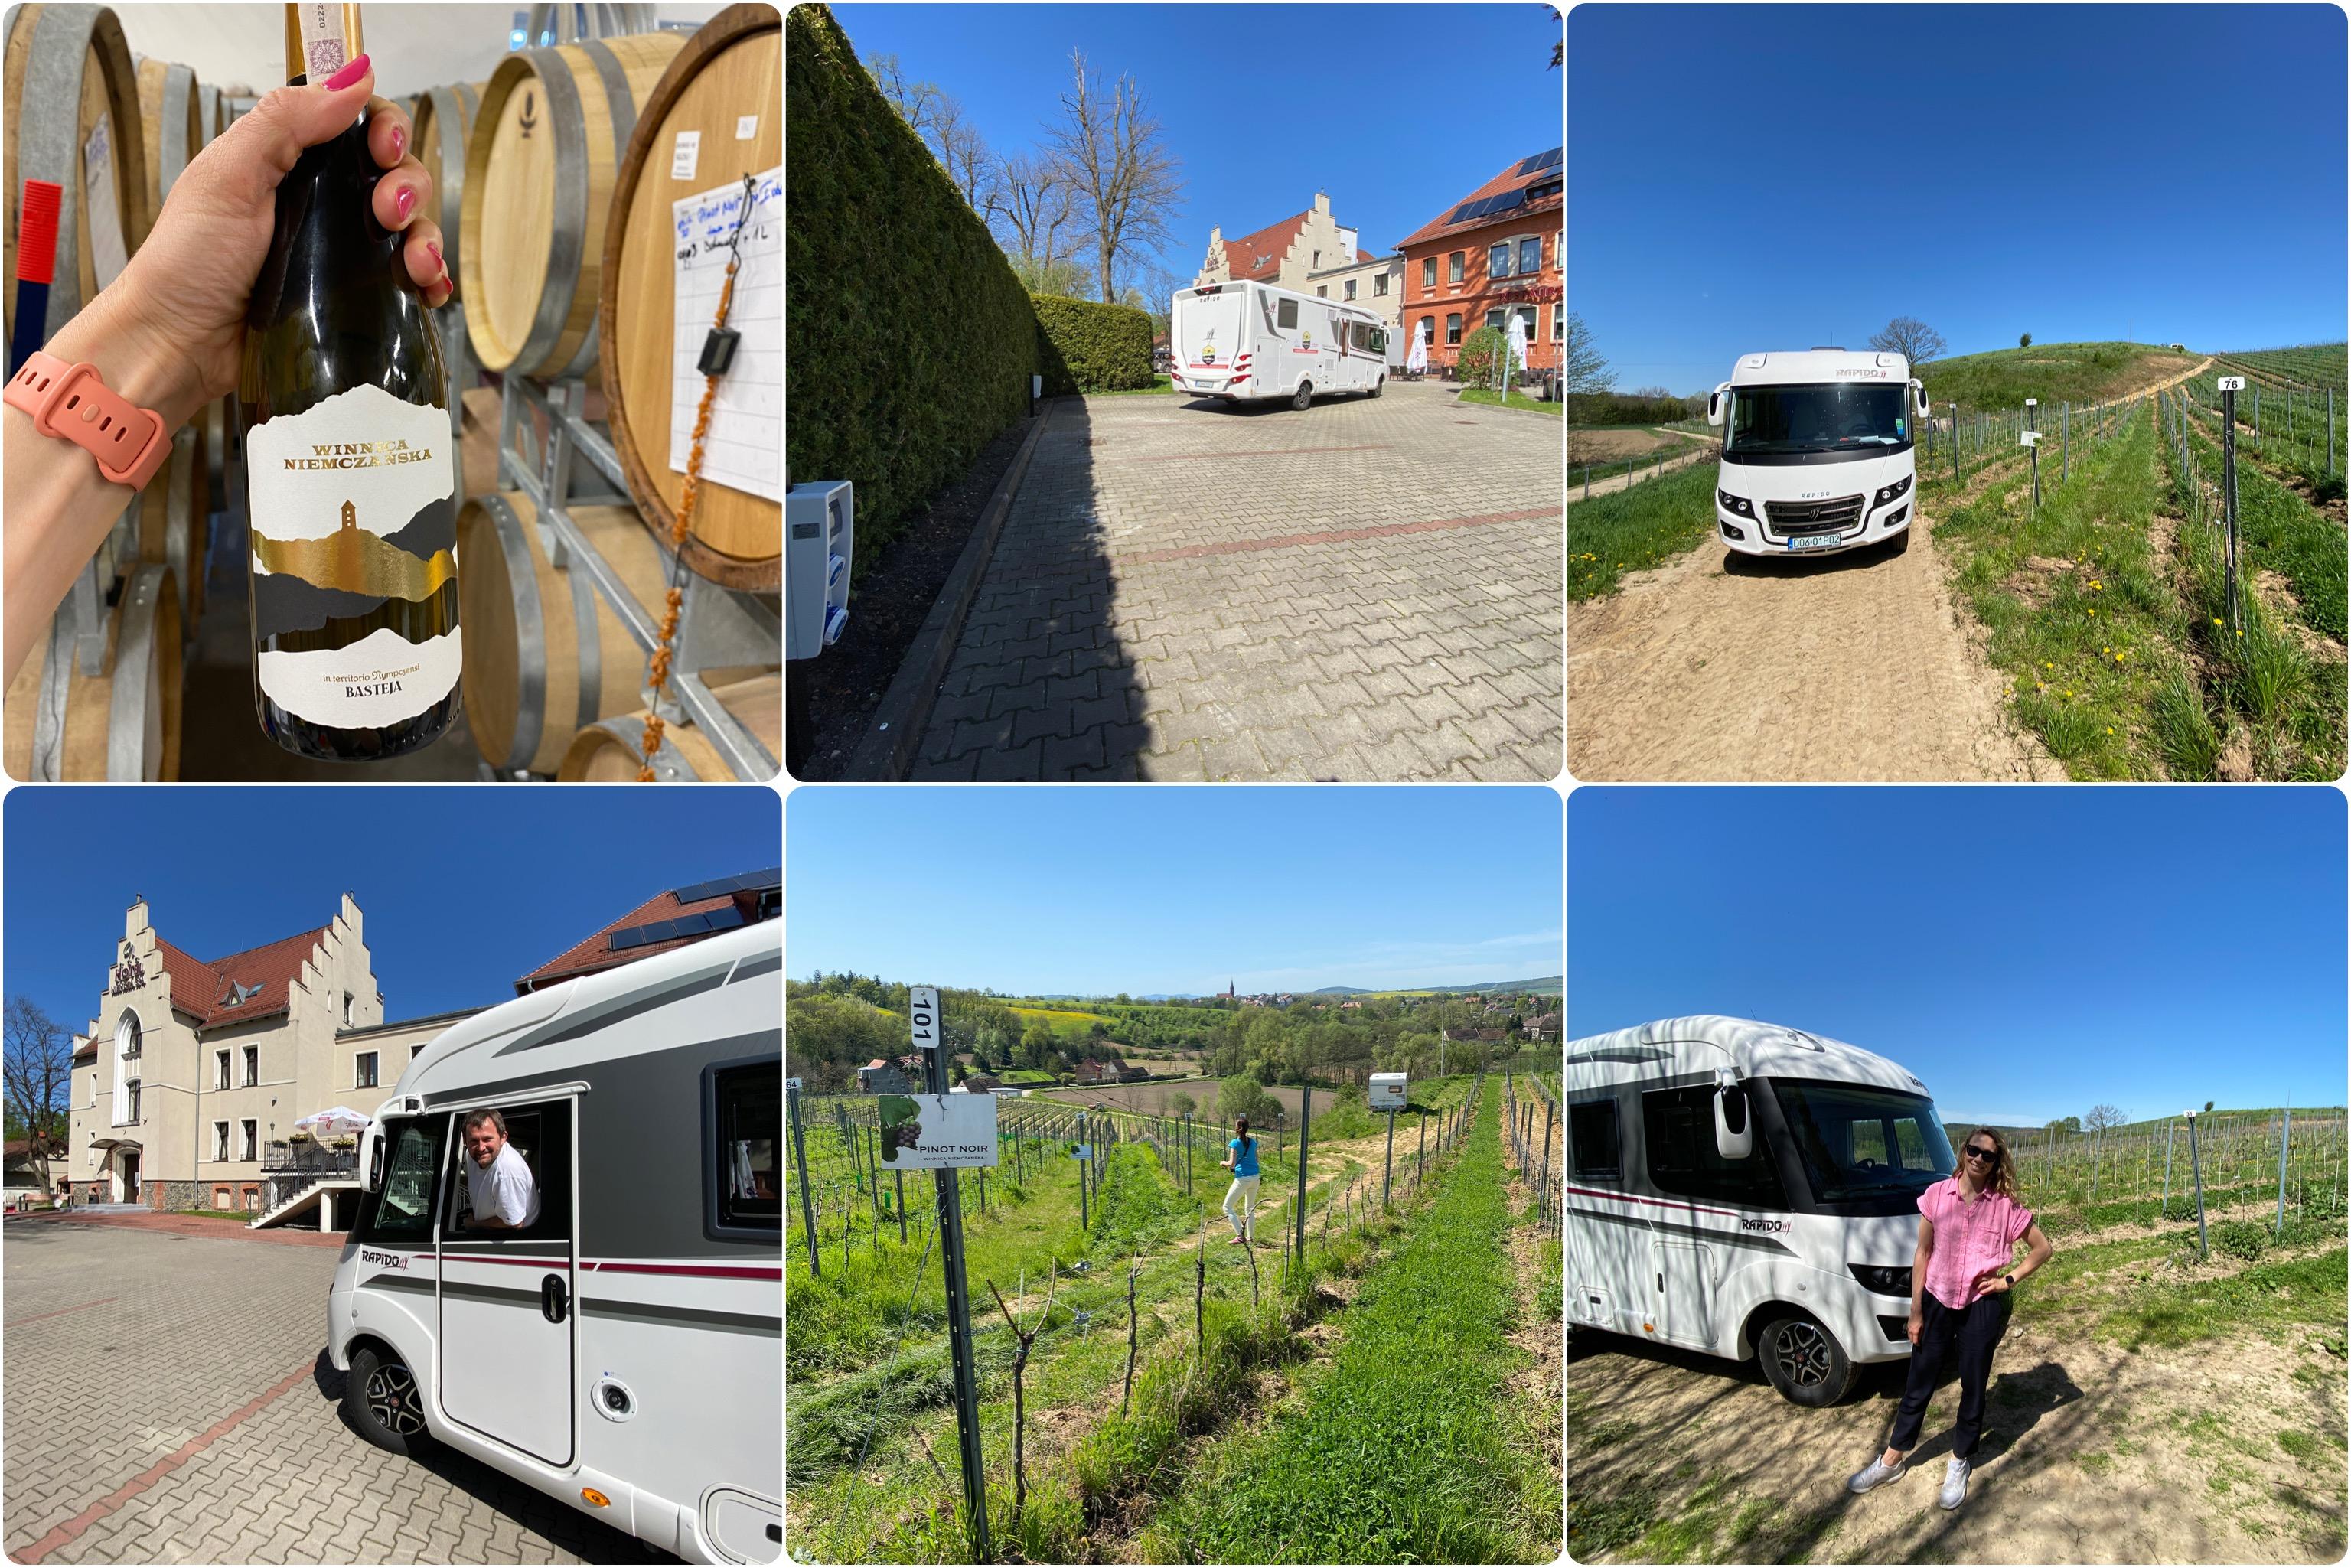 7 vineyards of Lower Silesia that we visited in a motorhome – image 1